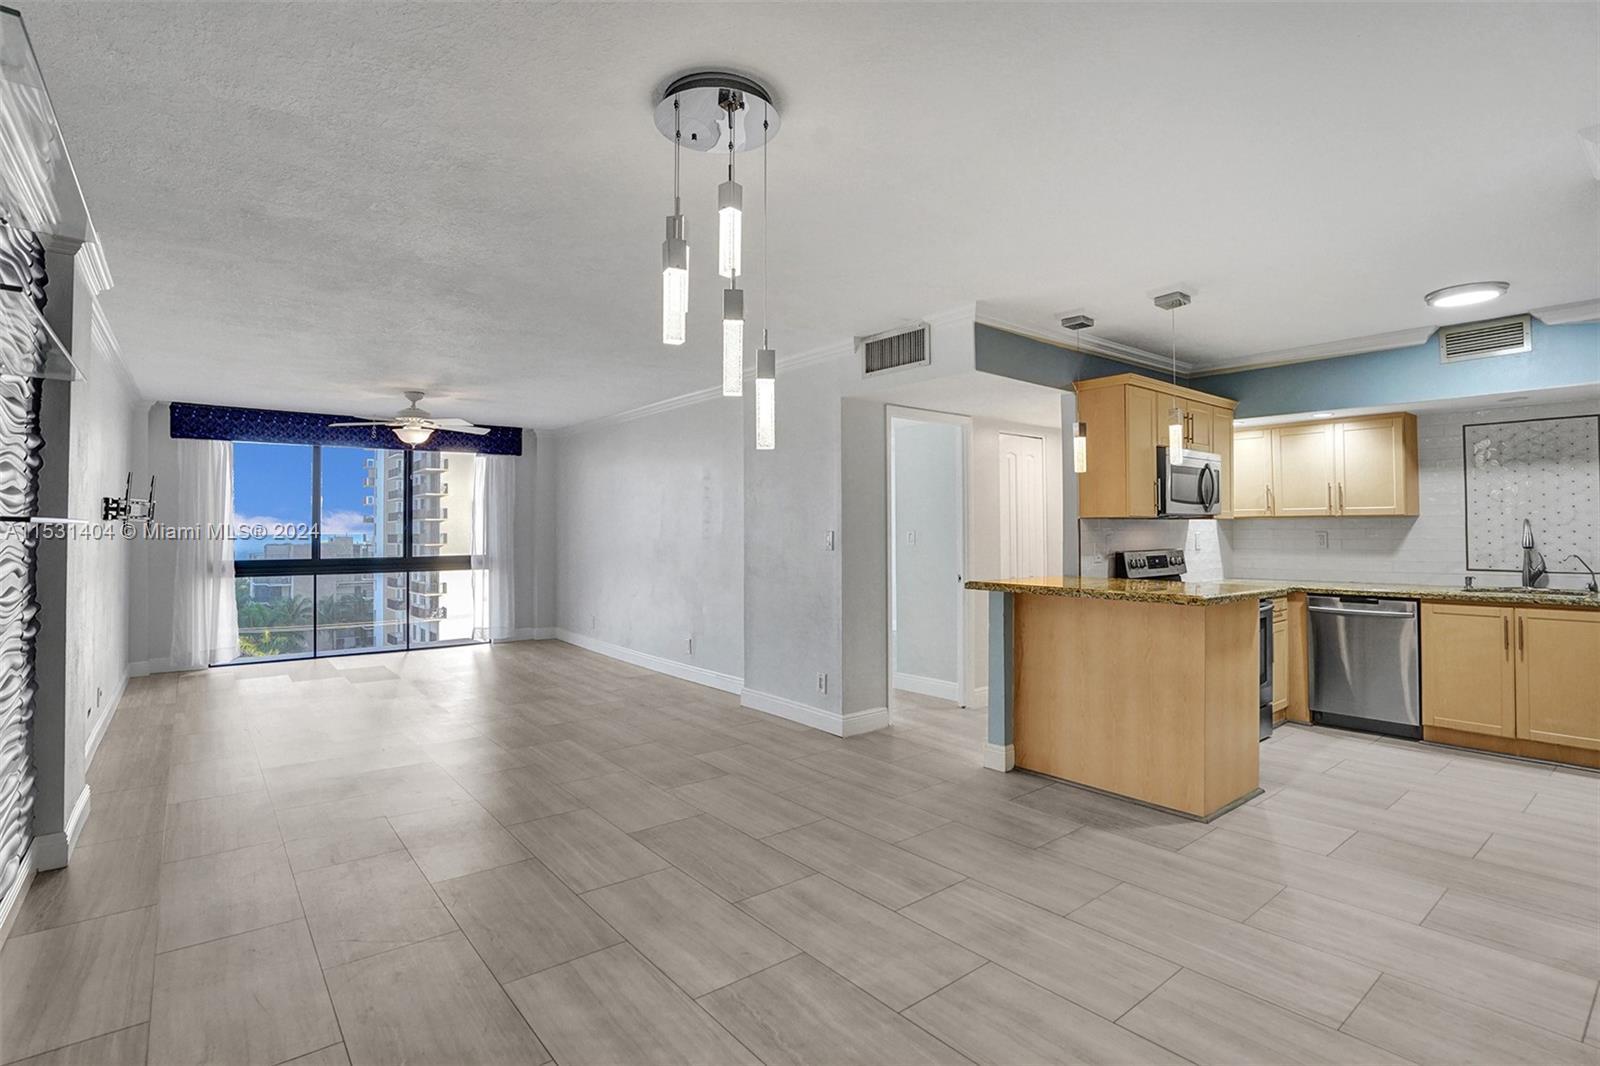 Photo of 1600 S Ocean Dr #8J in Hollywood, FL